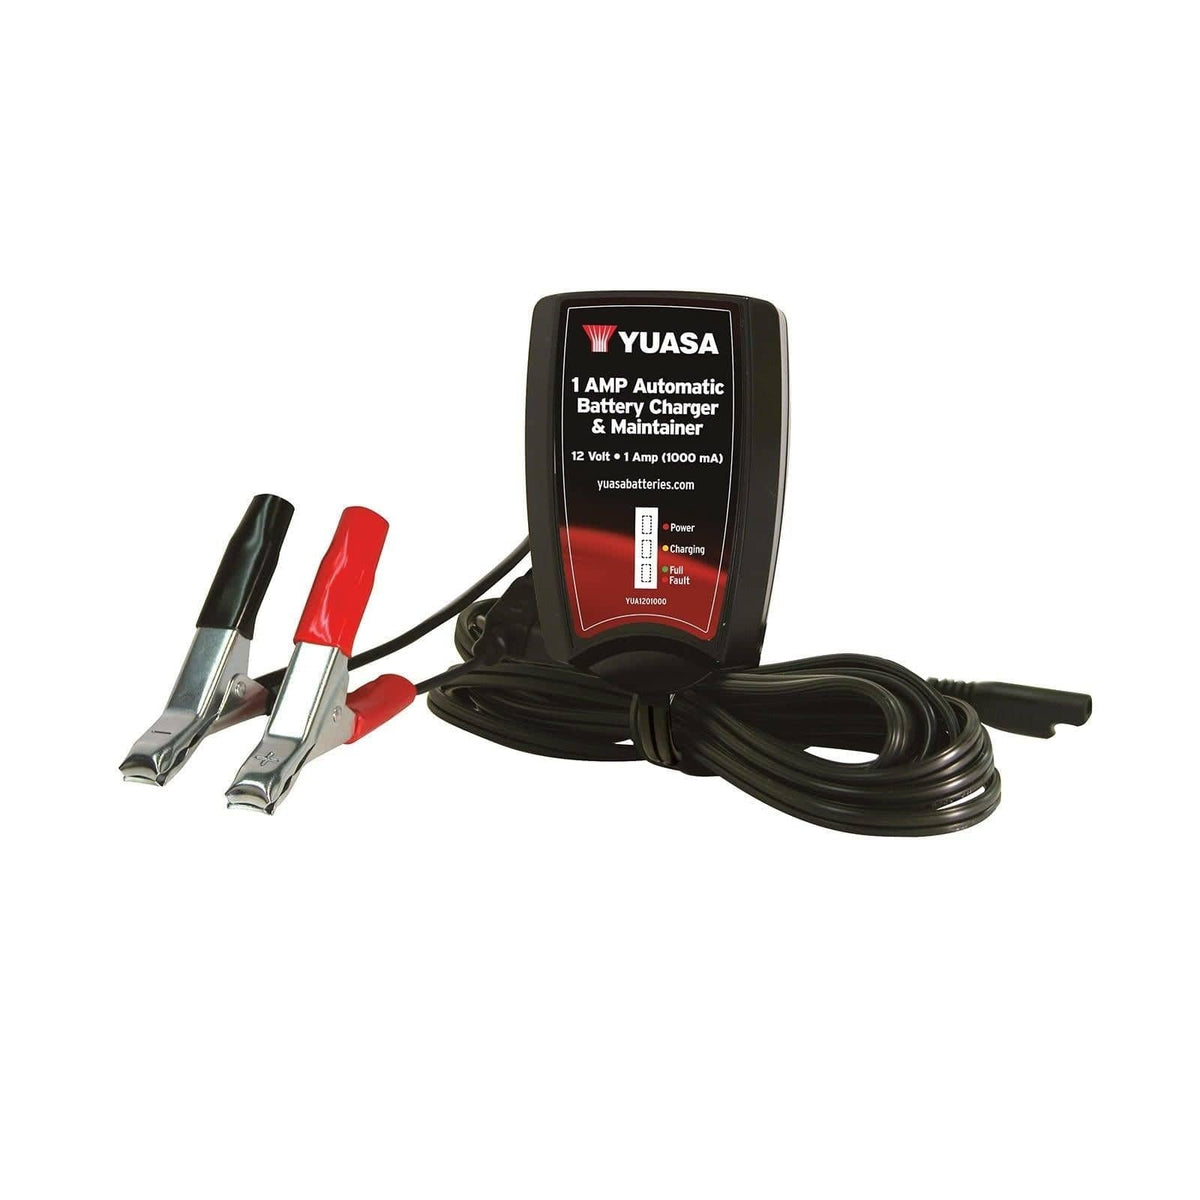 YUASAAutomatic 1 amp Battery Charger - Factory Recreation